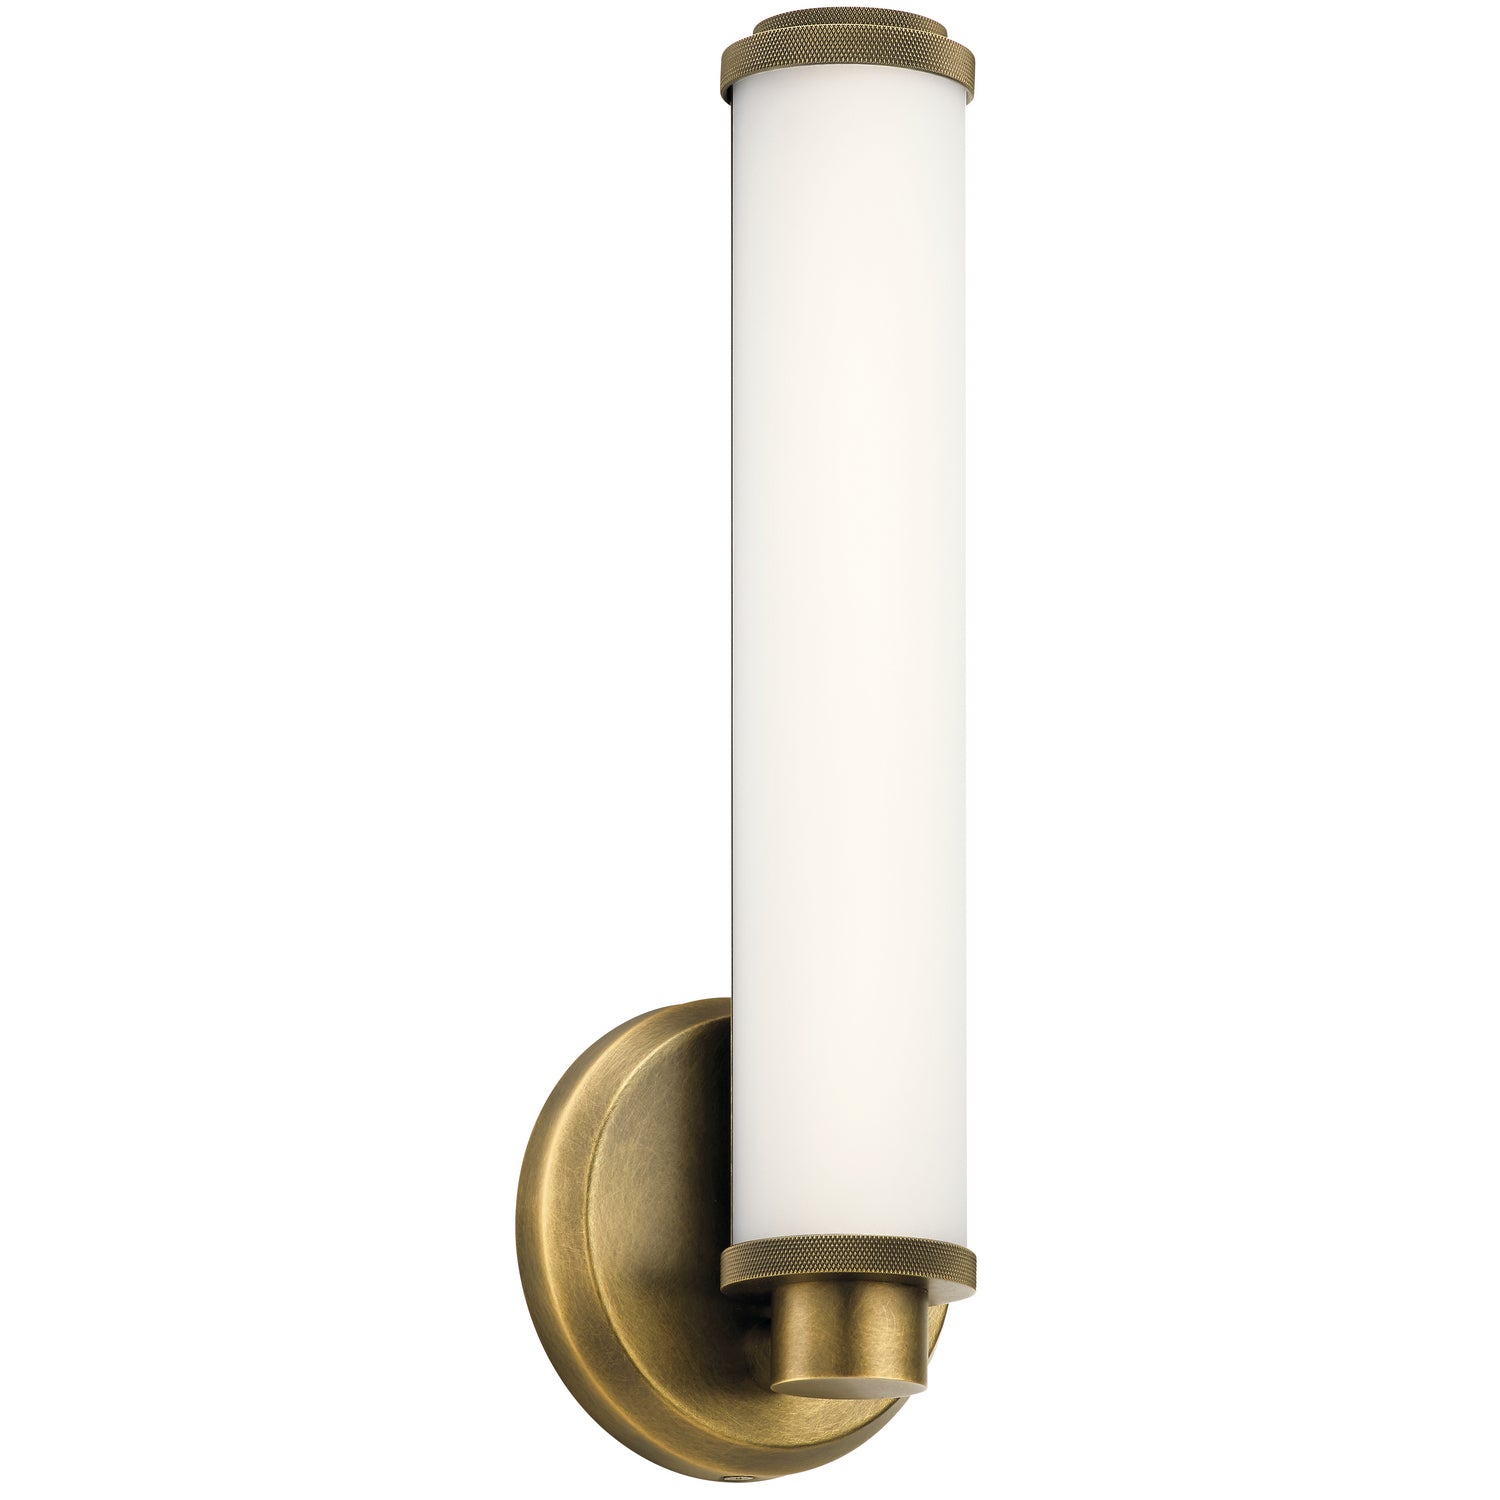 Kichler Canada - LED Wall Sconce - Indeco - Natural Brass- Union Lighting Luminaires Decor